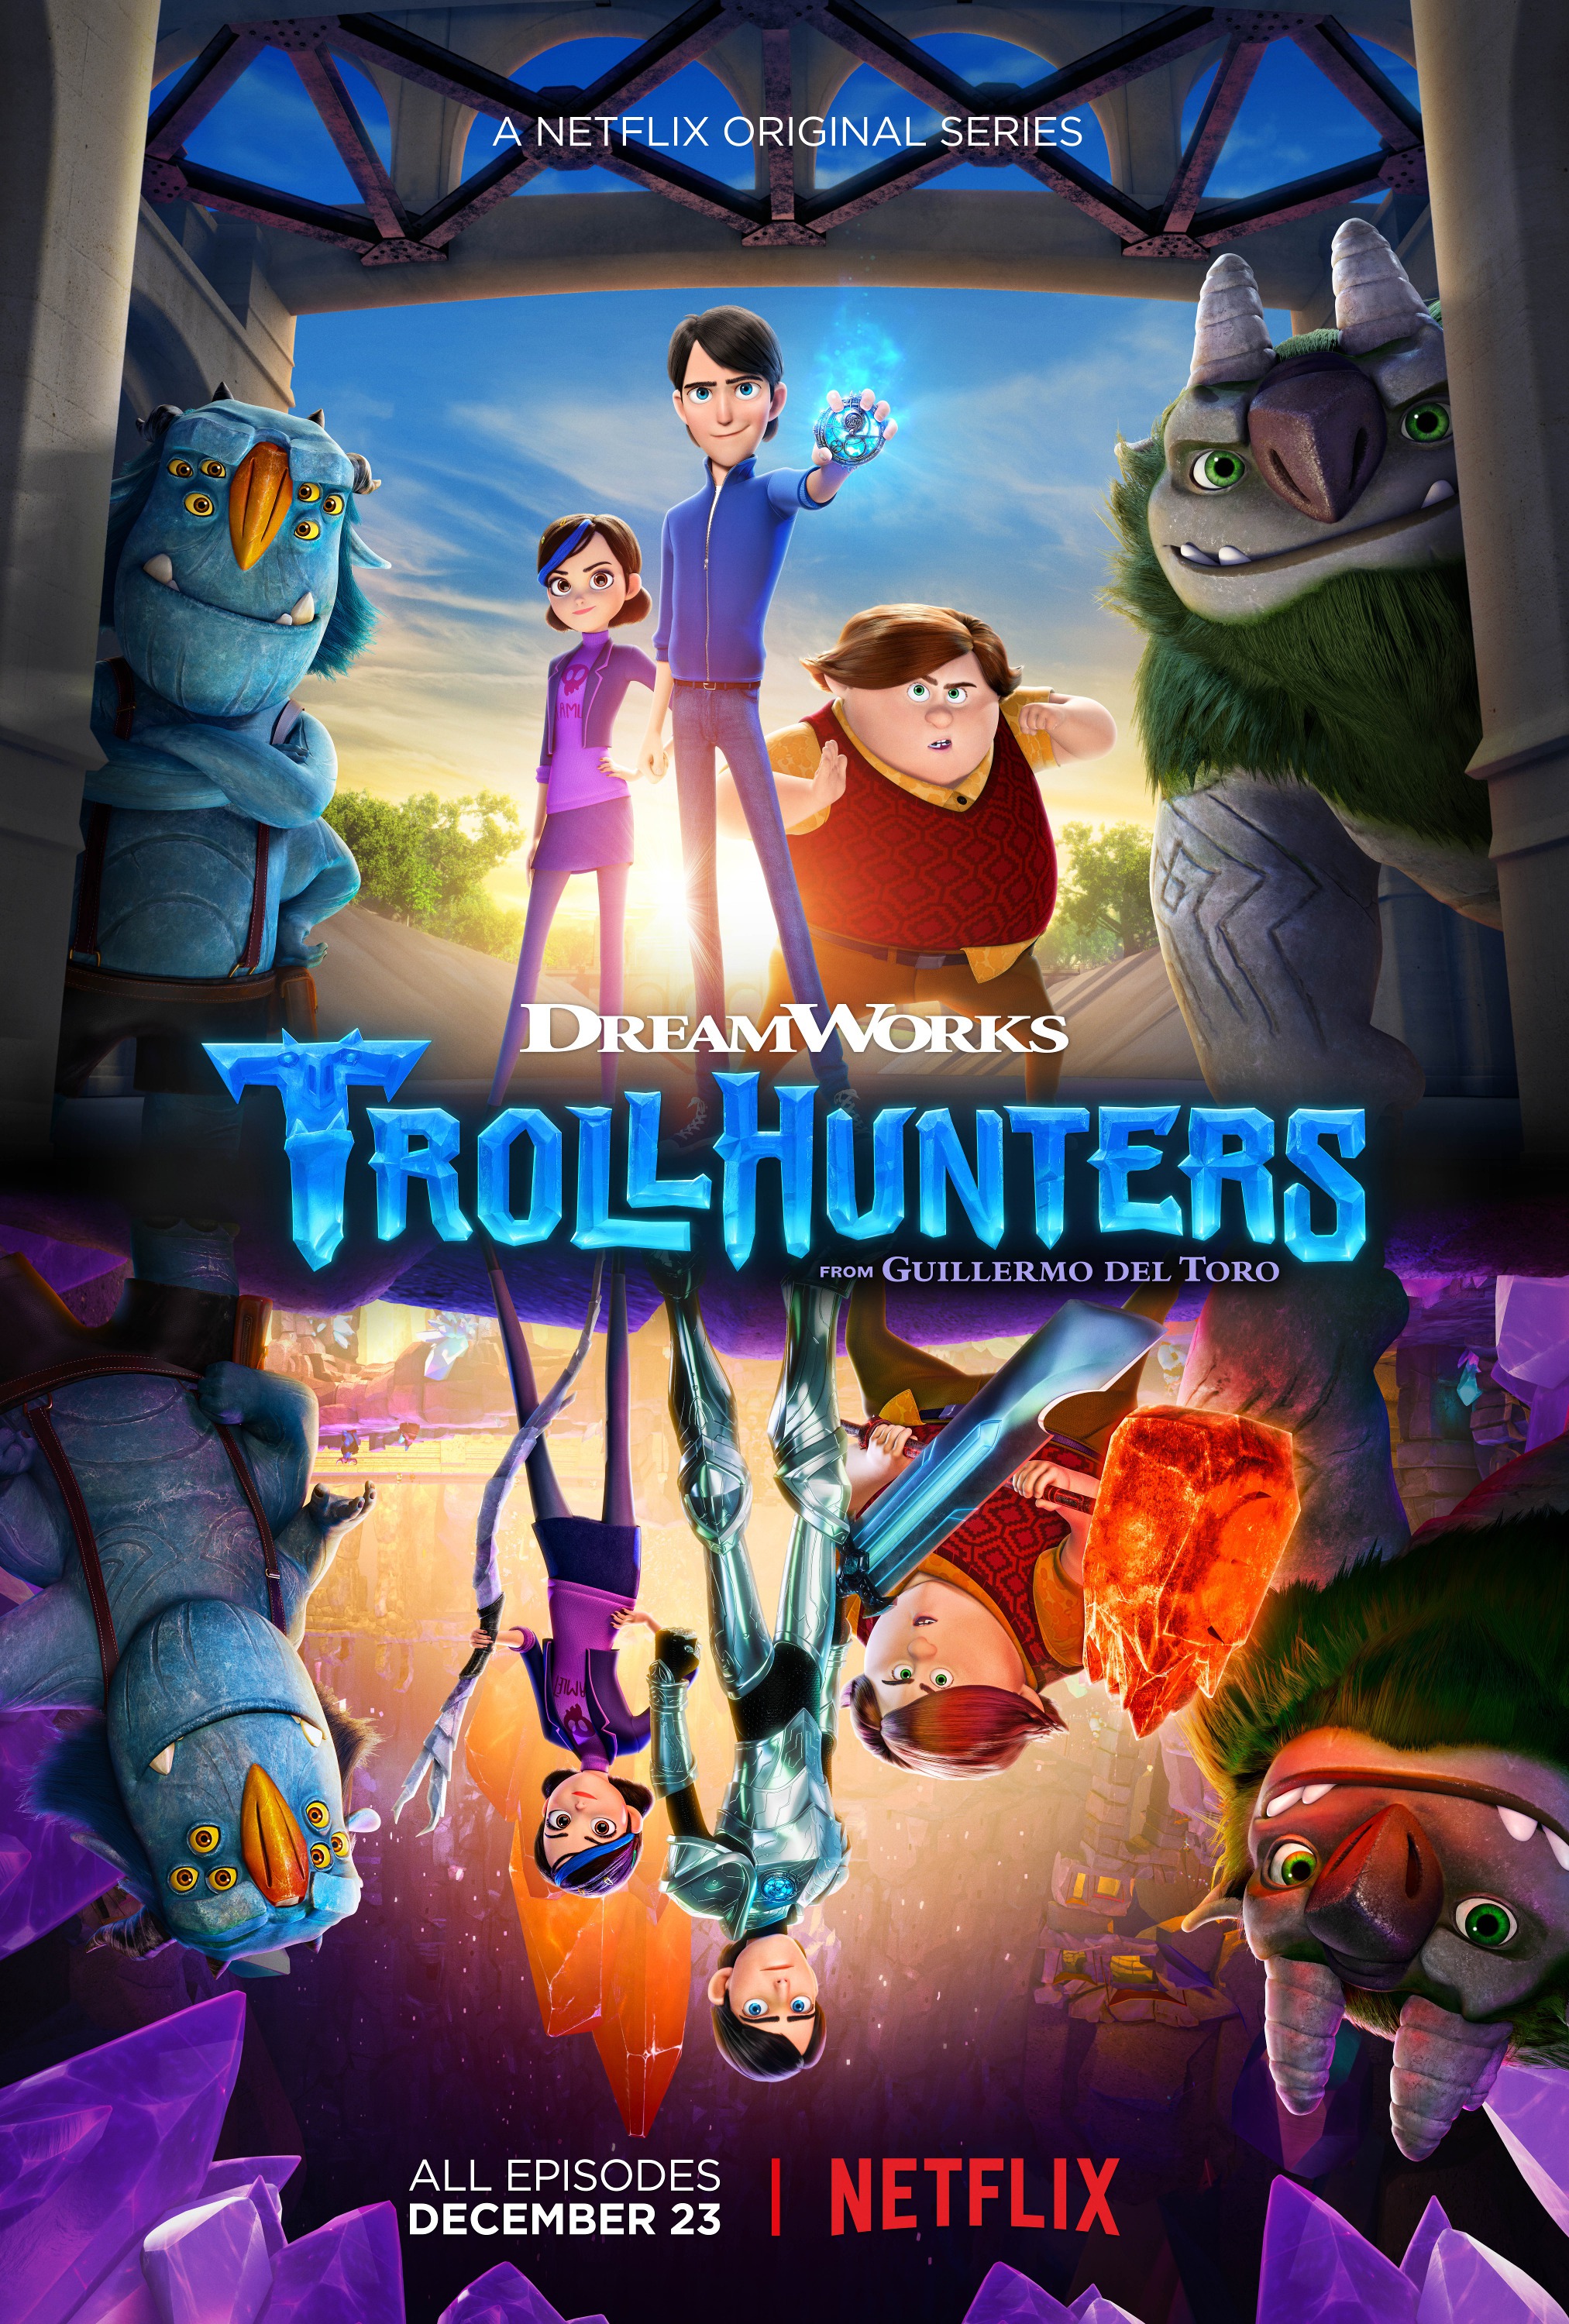 Mega Sized TV Poster Image for Trollhunters (#1 of 20)